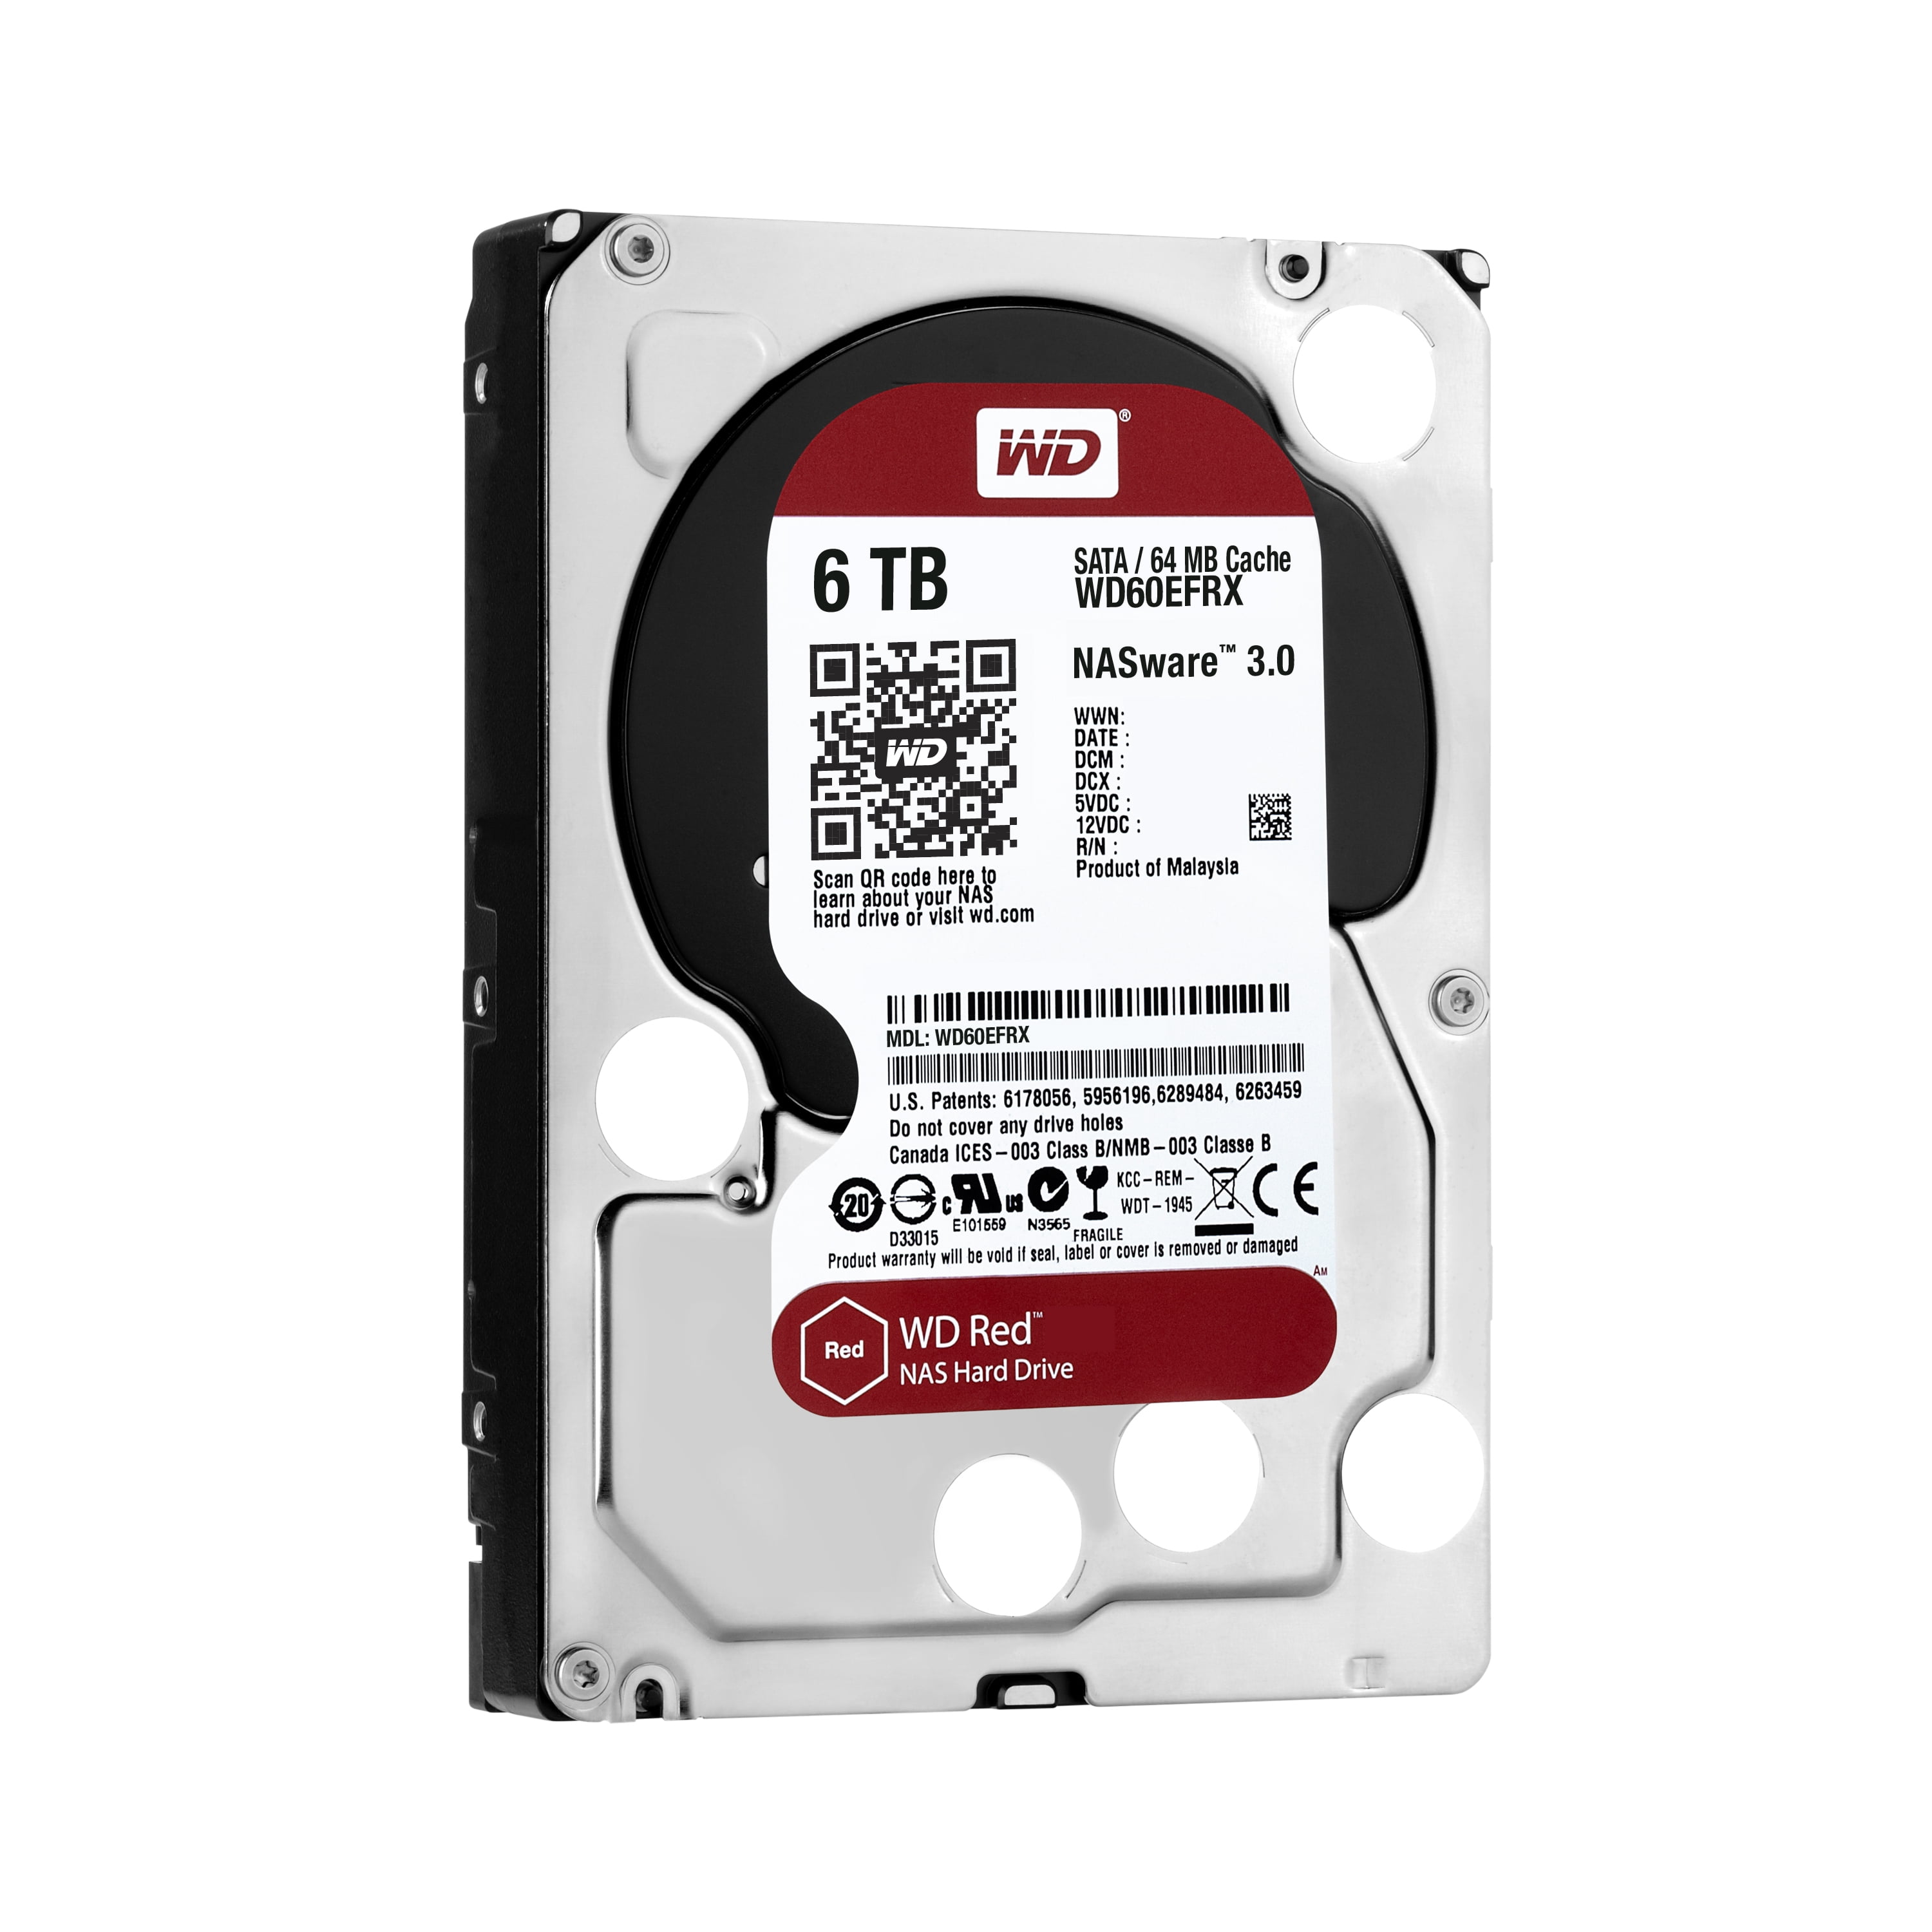 Western Digital Red NAS Hard Drive Review [WD30EFRX